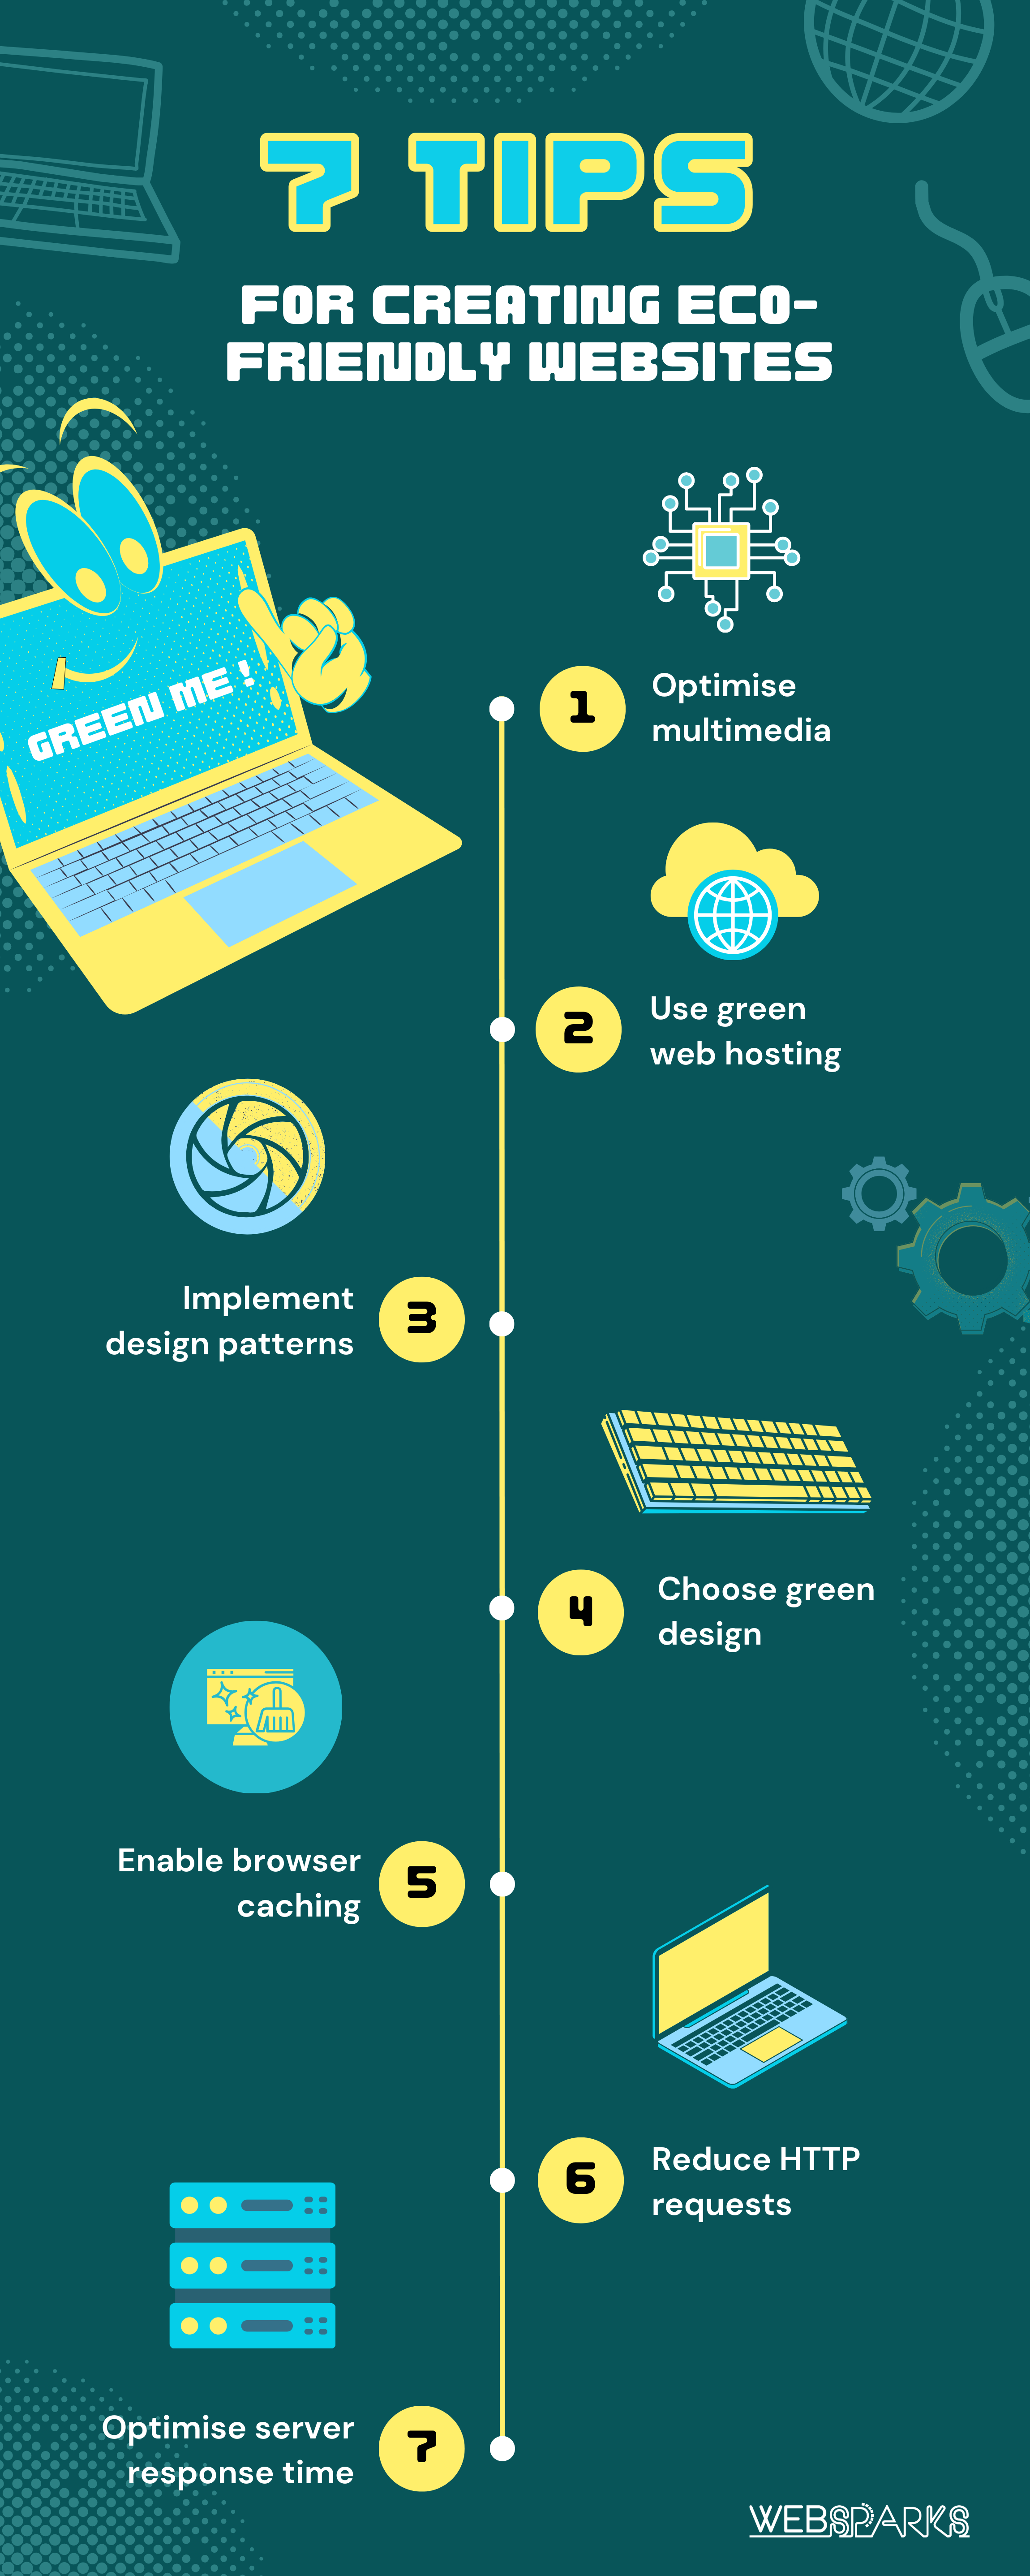 infographic on 7 tips for creating eco-friendly websites